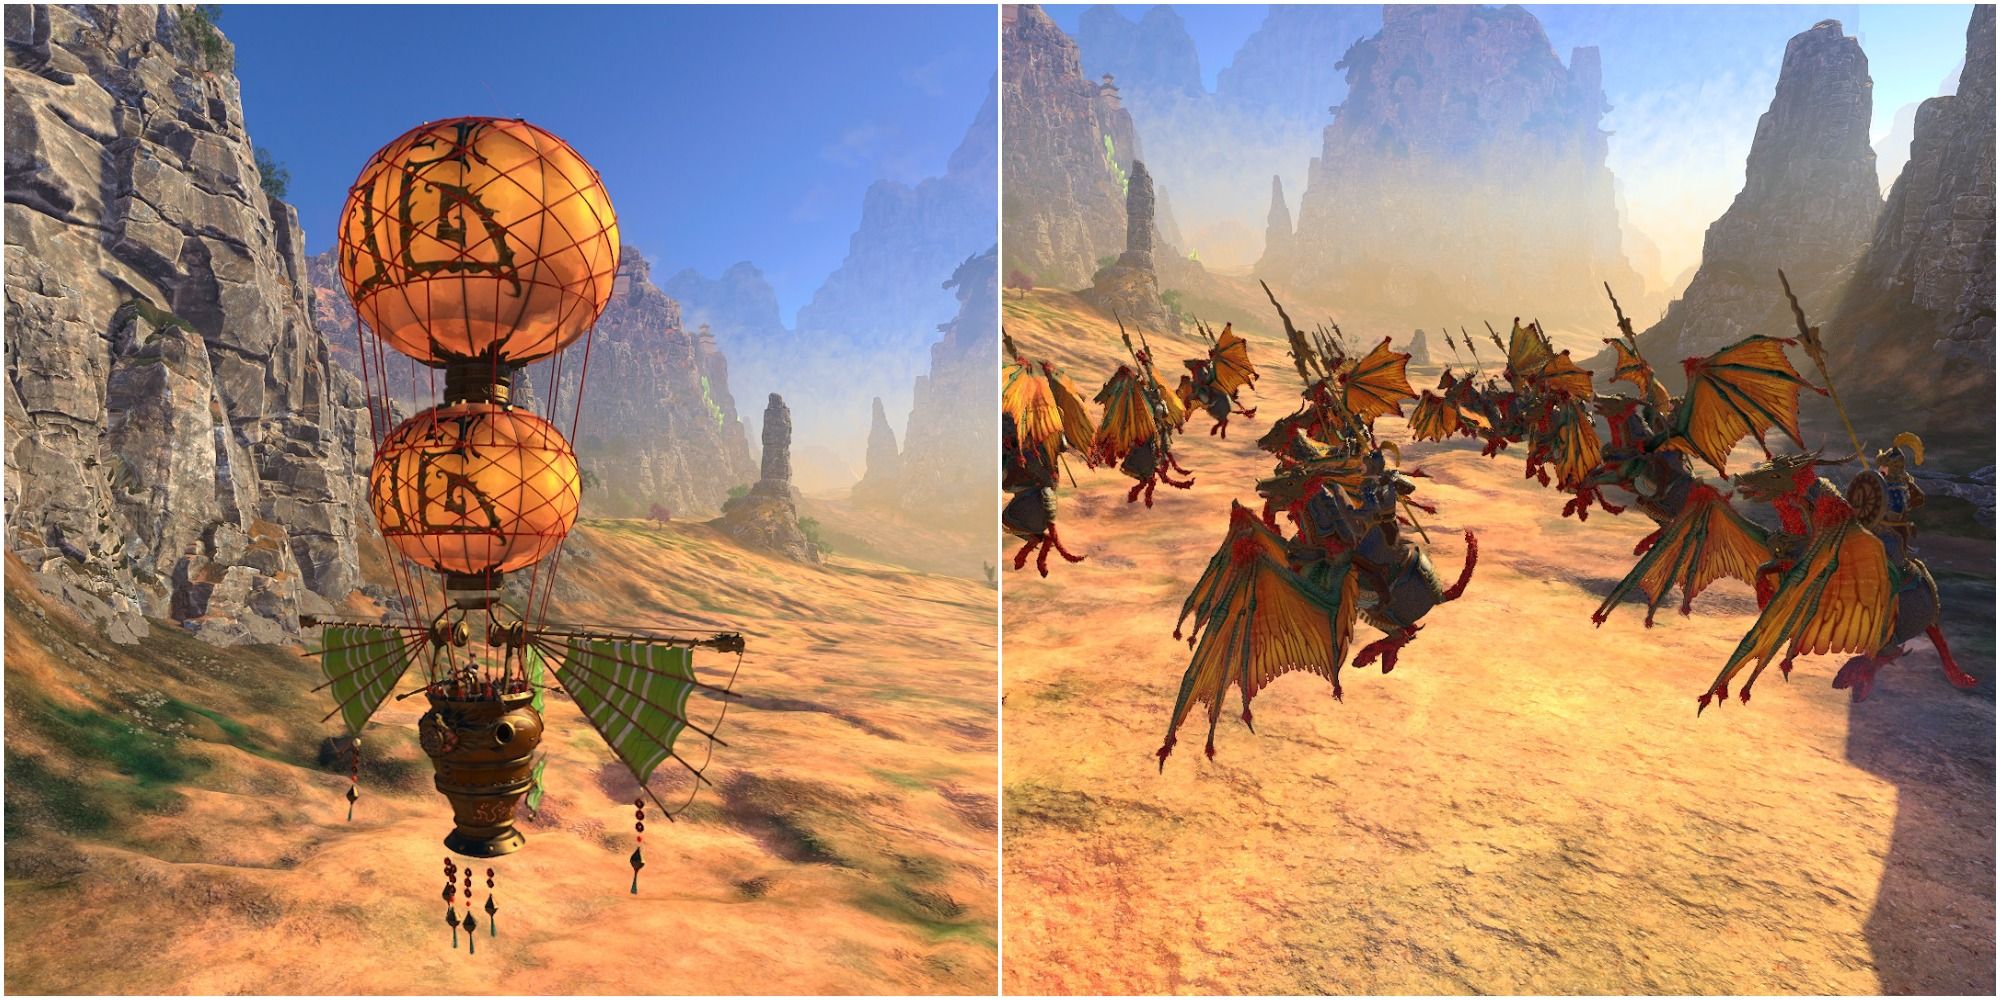 Total War Warhammer 3 Great Longma Riders and Sky-Junk flying above desert